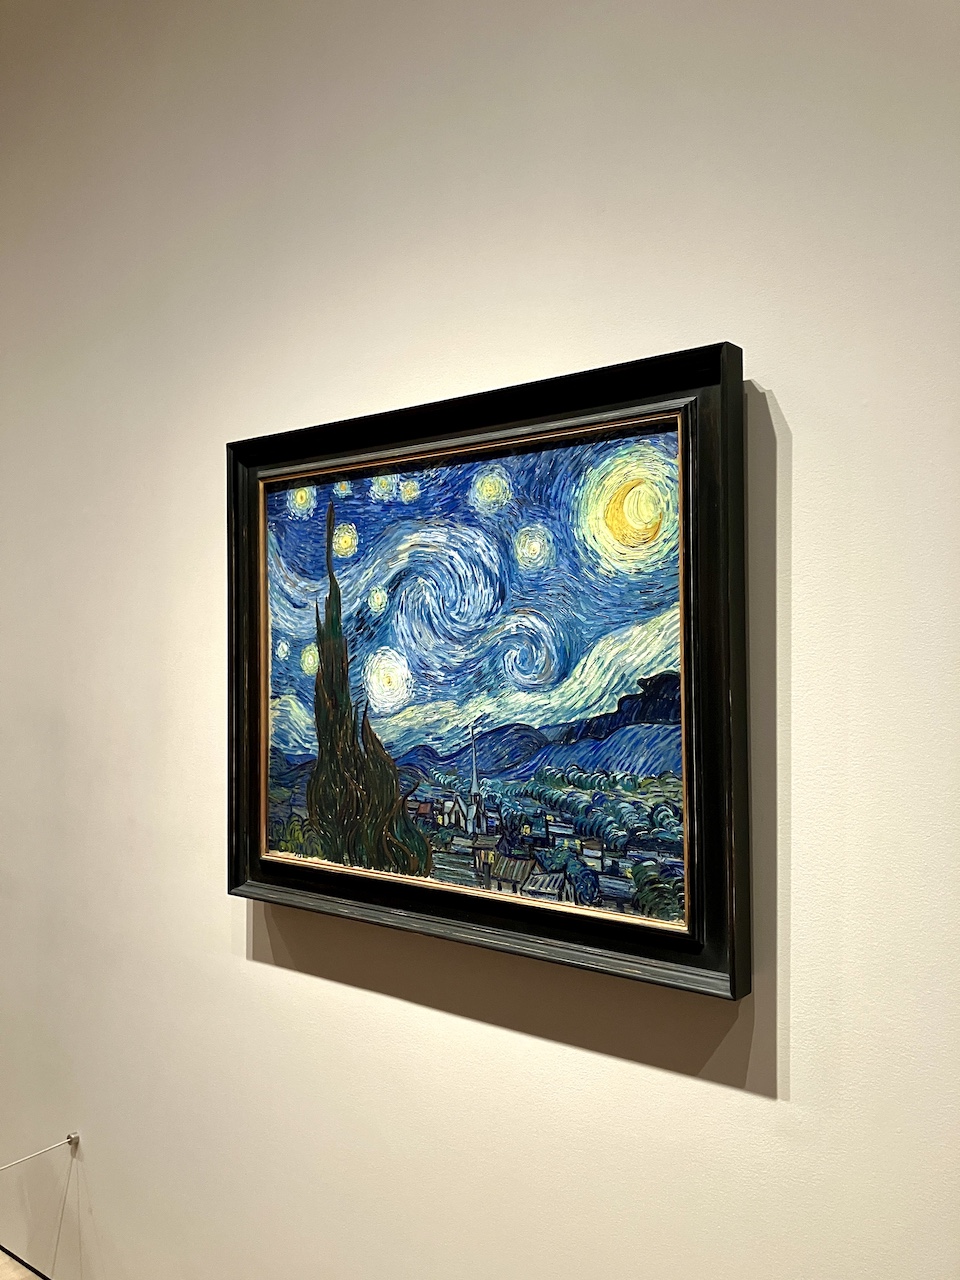 Vincent van Gogh's The Starry Night at MoMA, Museum of Modern Art, New York | photo By Kerwin